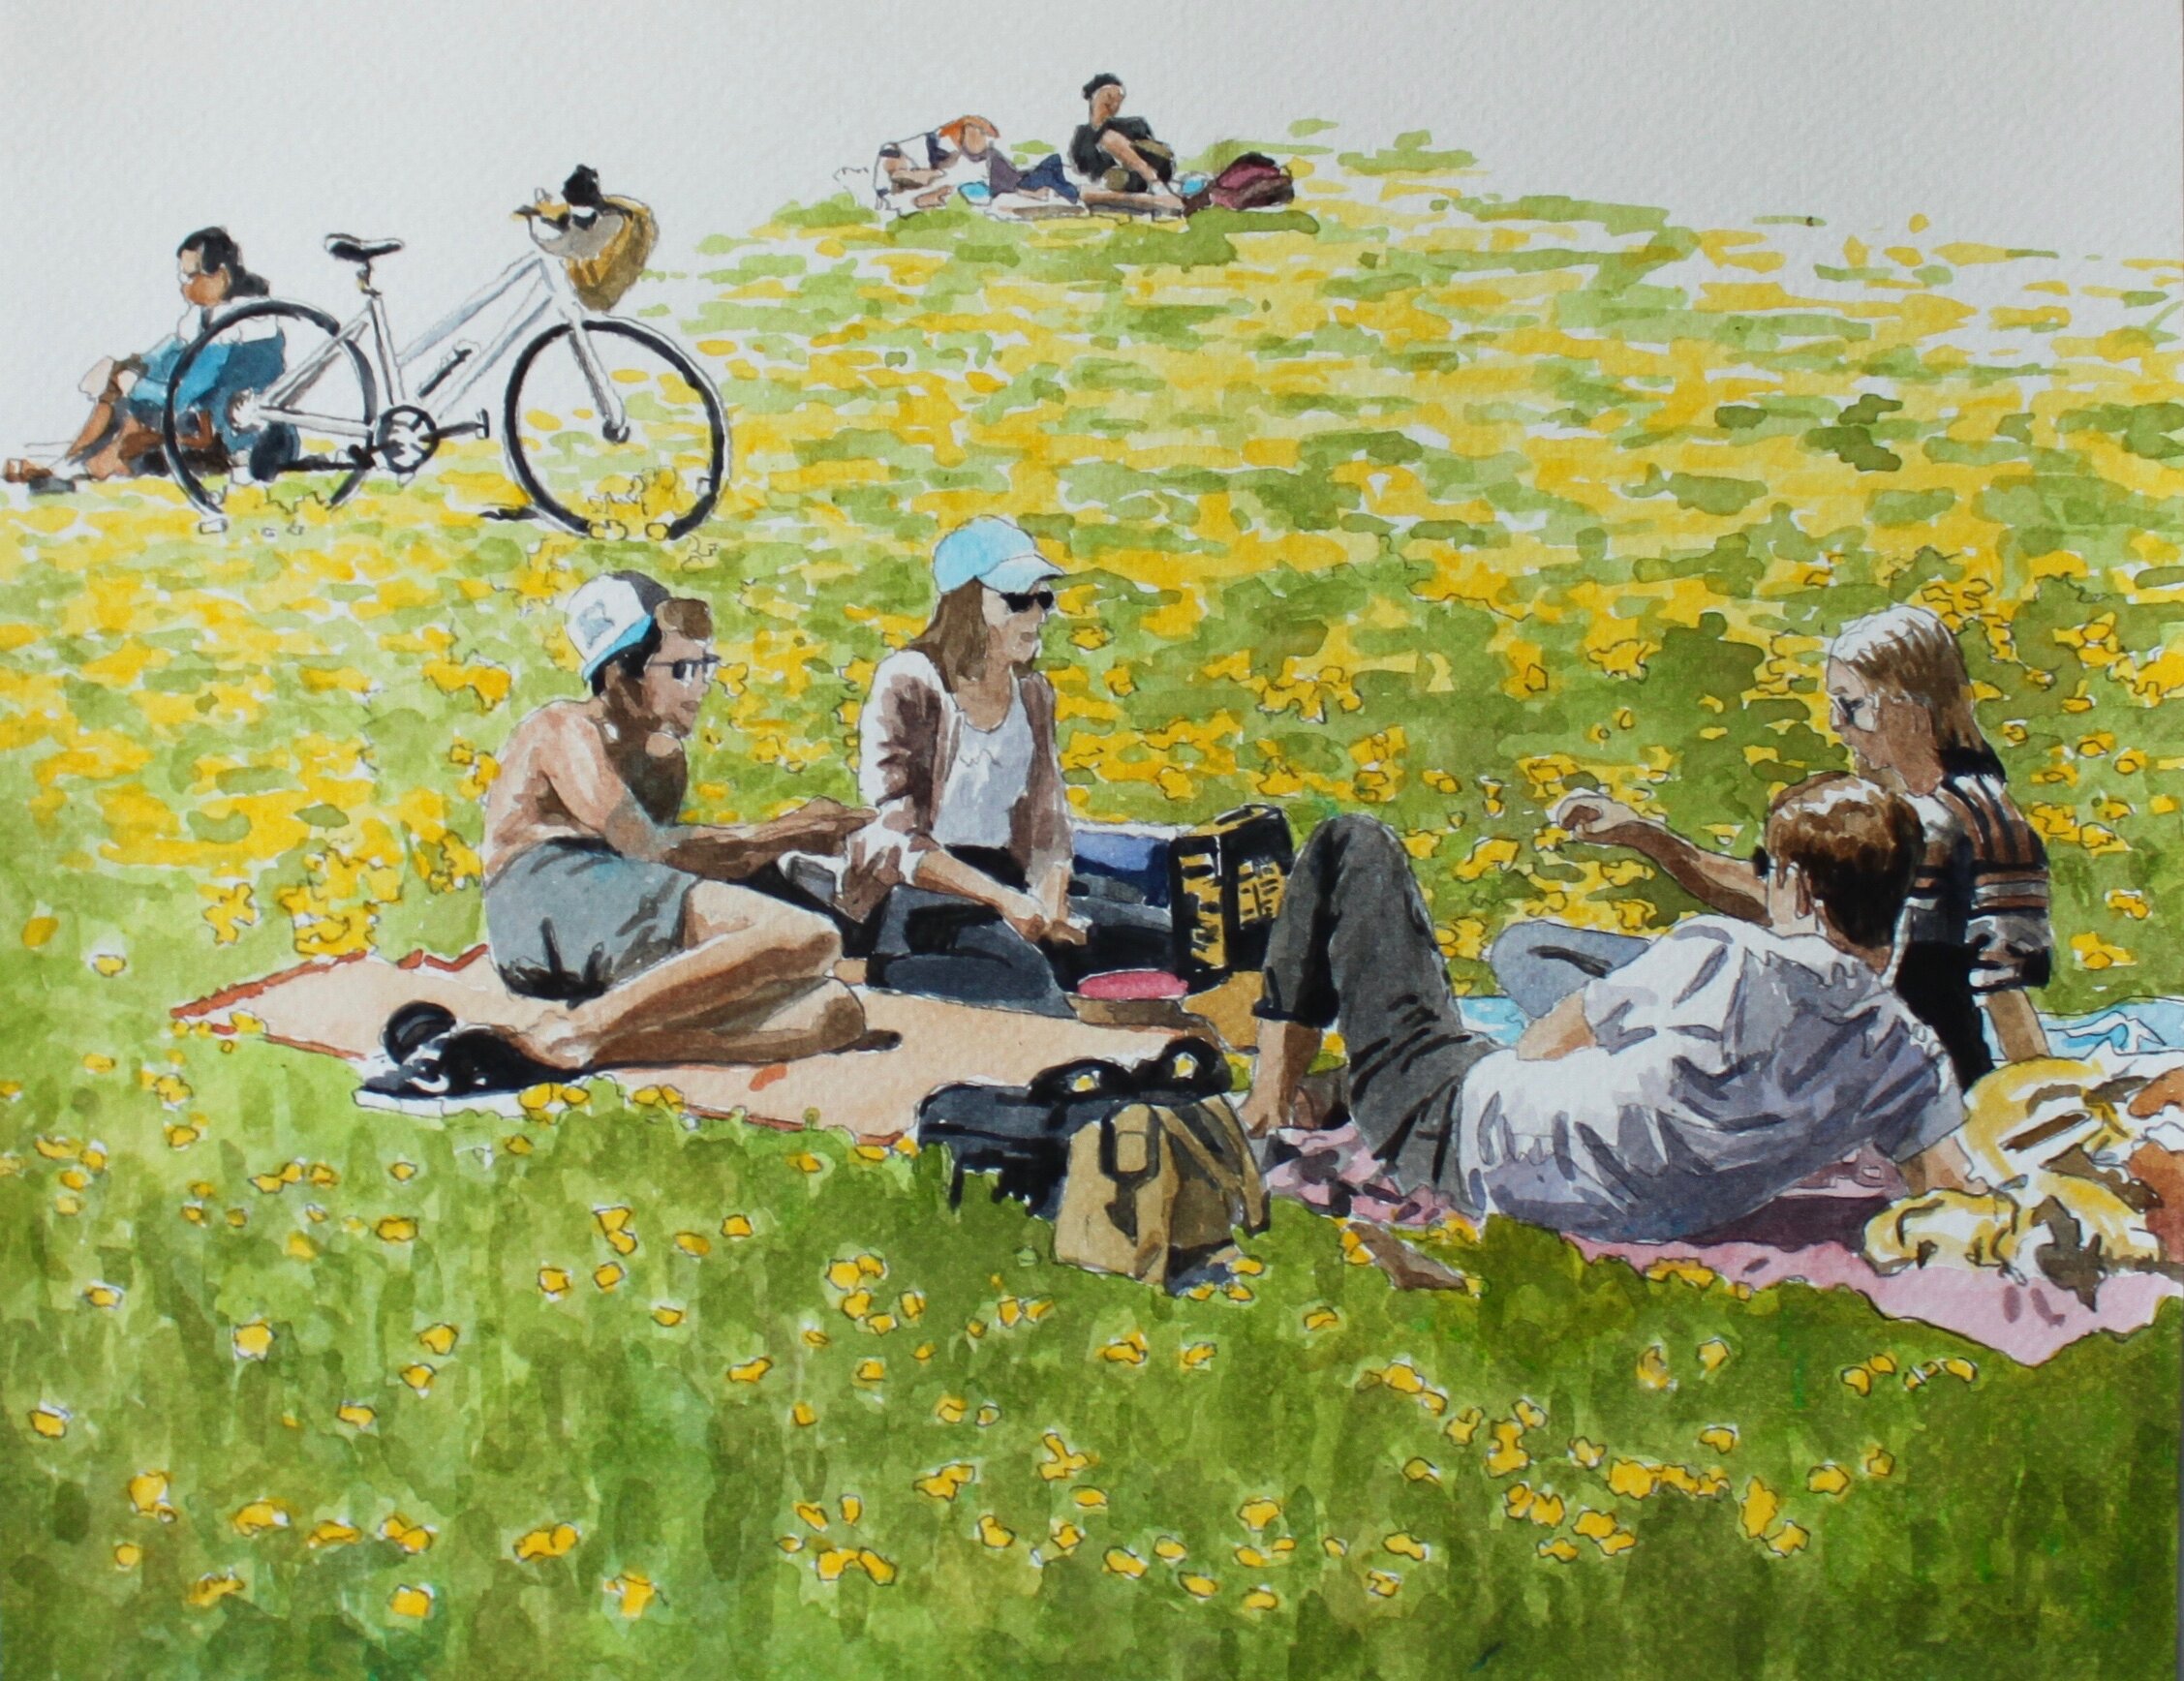 Untitled, People Picnicking, 2020, 10 x 14 inches, acrylic on paper